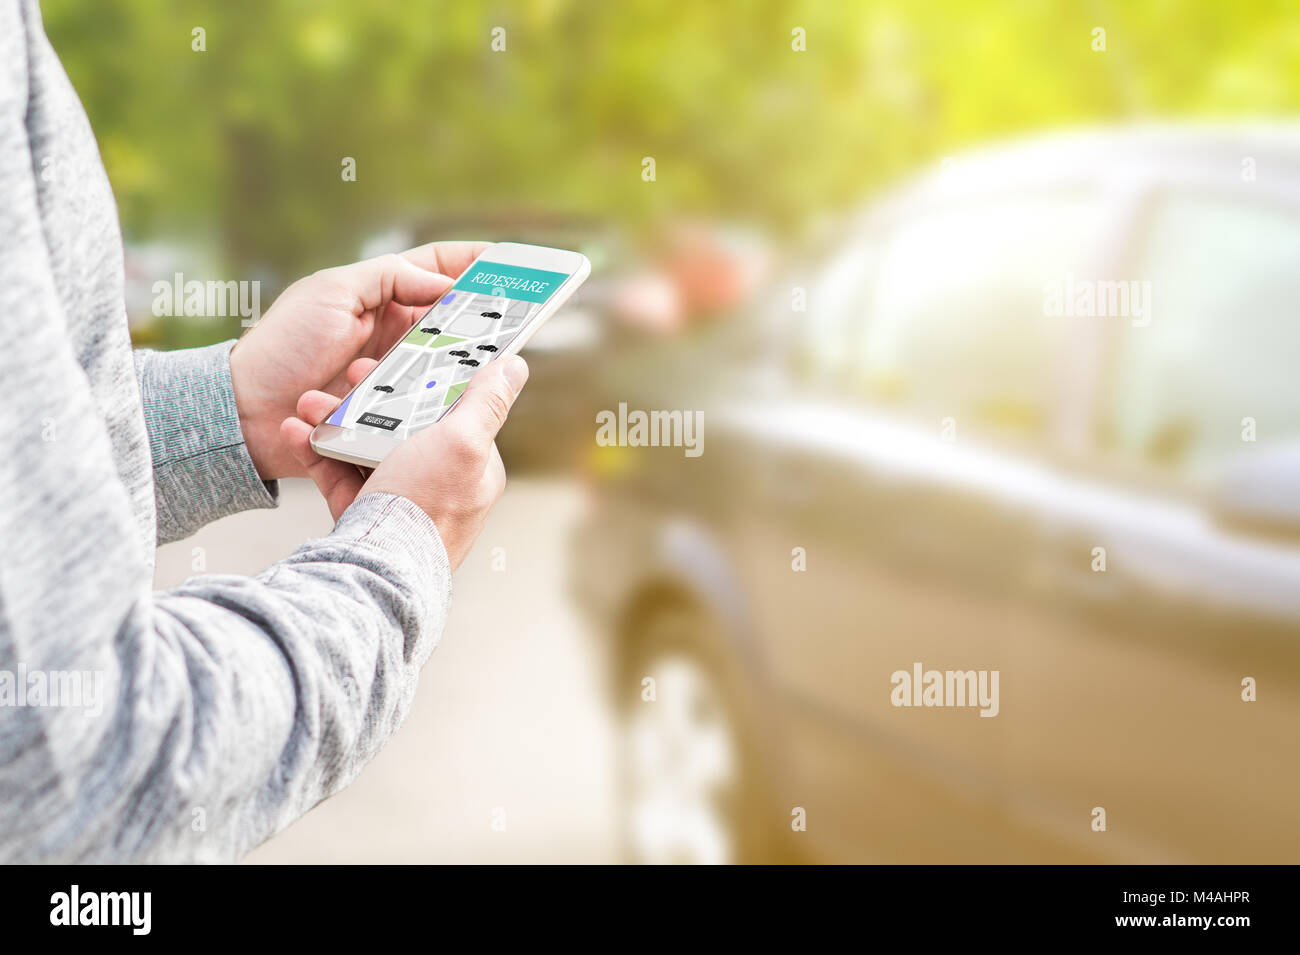 Online ride sharing and carpool mobile application. Rideshare taxi app on smartphone screen. Modern people and commuter transportation service. Stock Photo